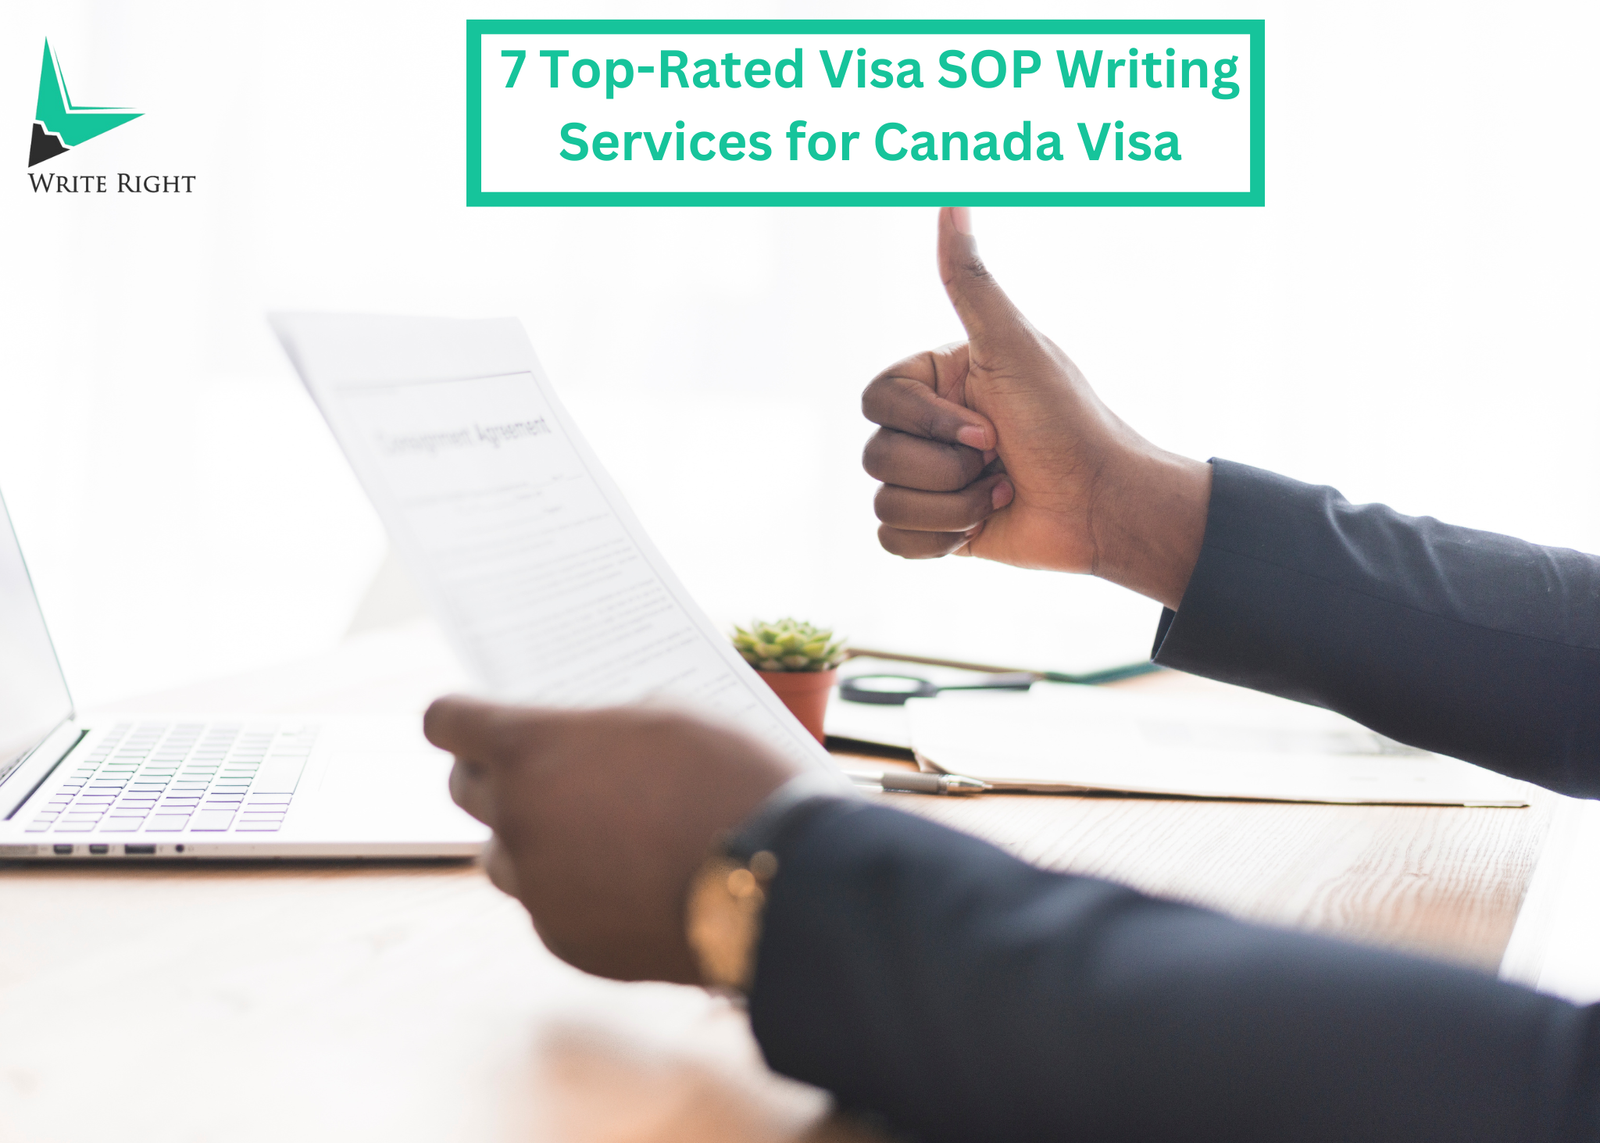 7 Top-Rated Visa SOP Writing Services for Canada Visa